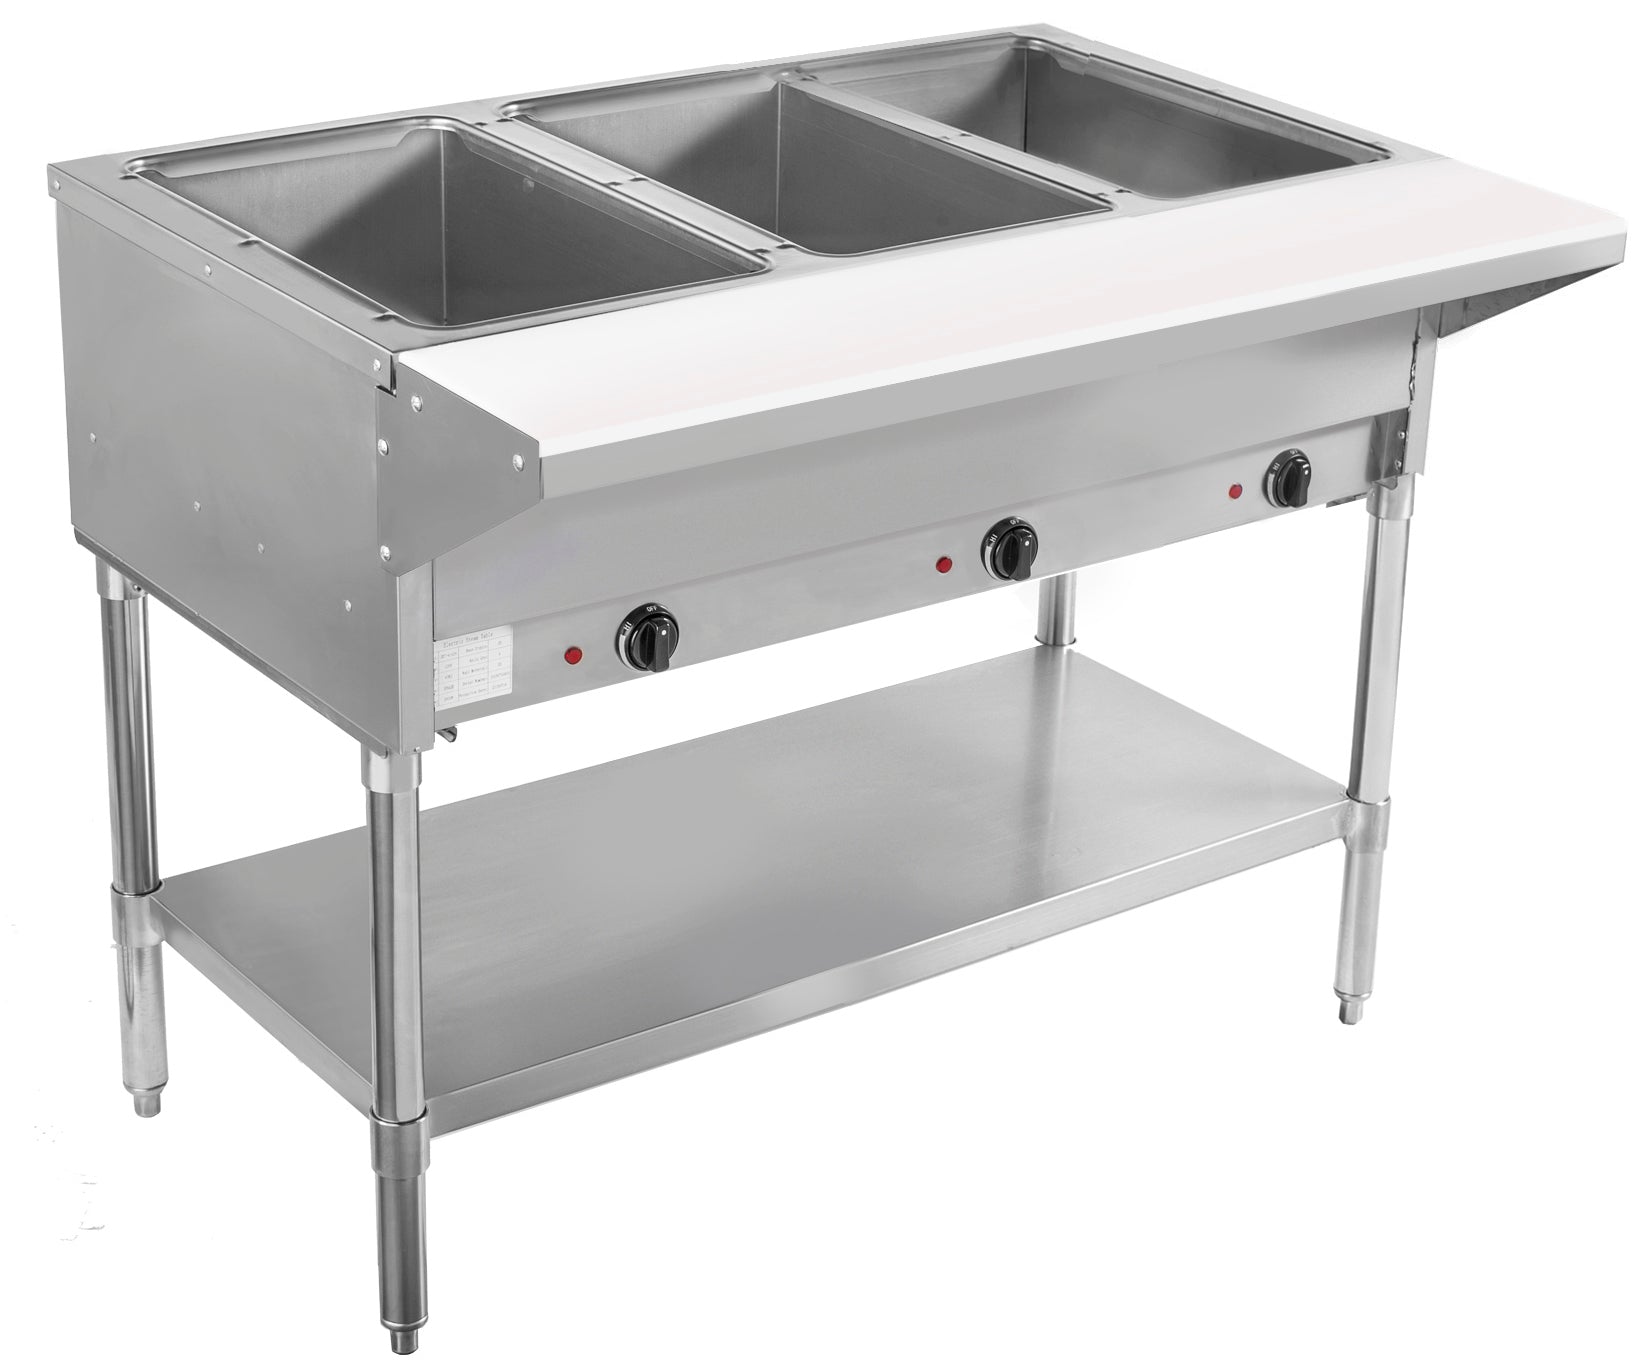 BevLes - BVST-3-240, BevLes 3 Well Electric Steam Table, 230V, in Silver